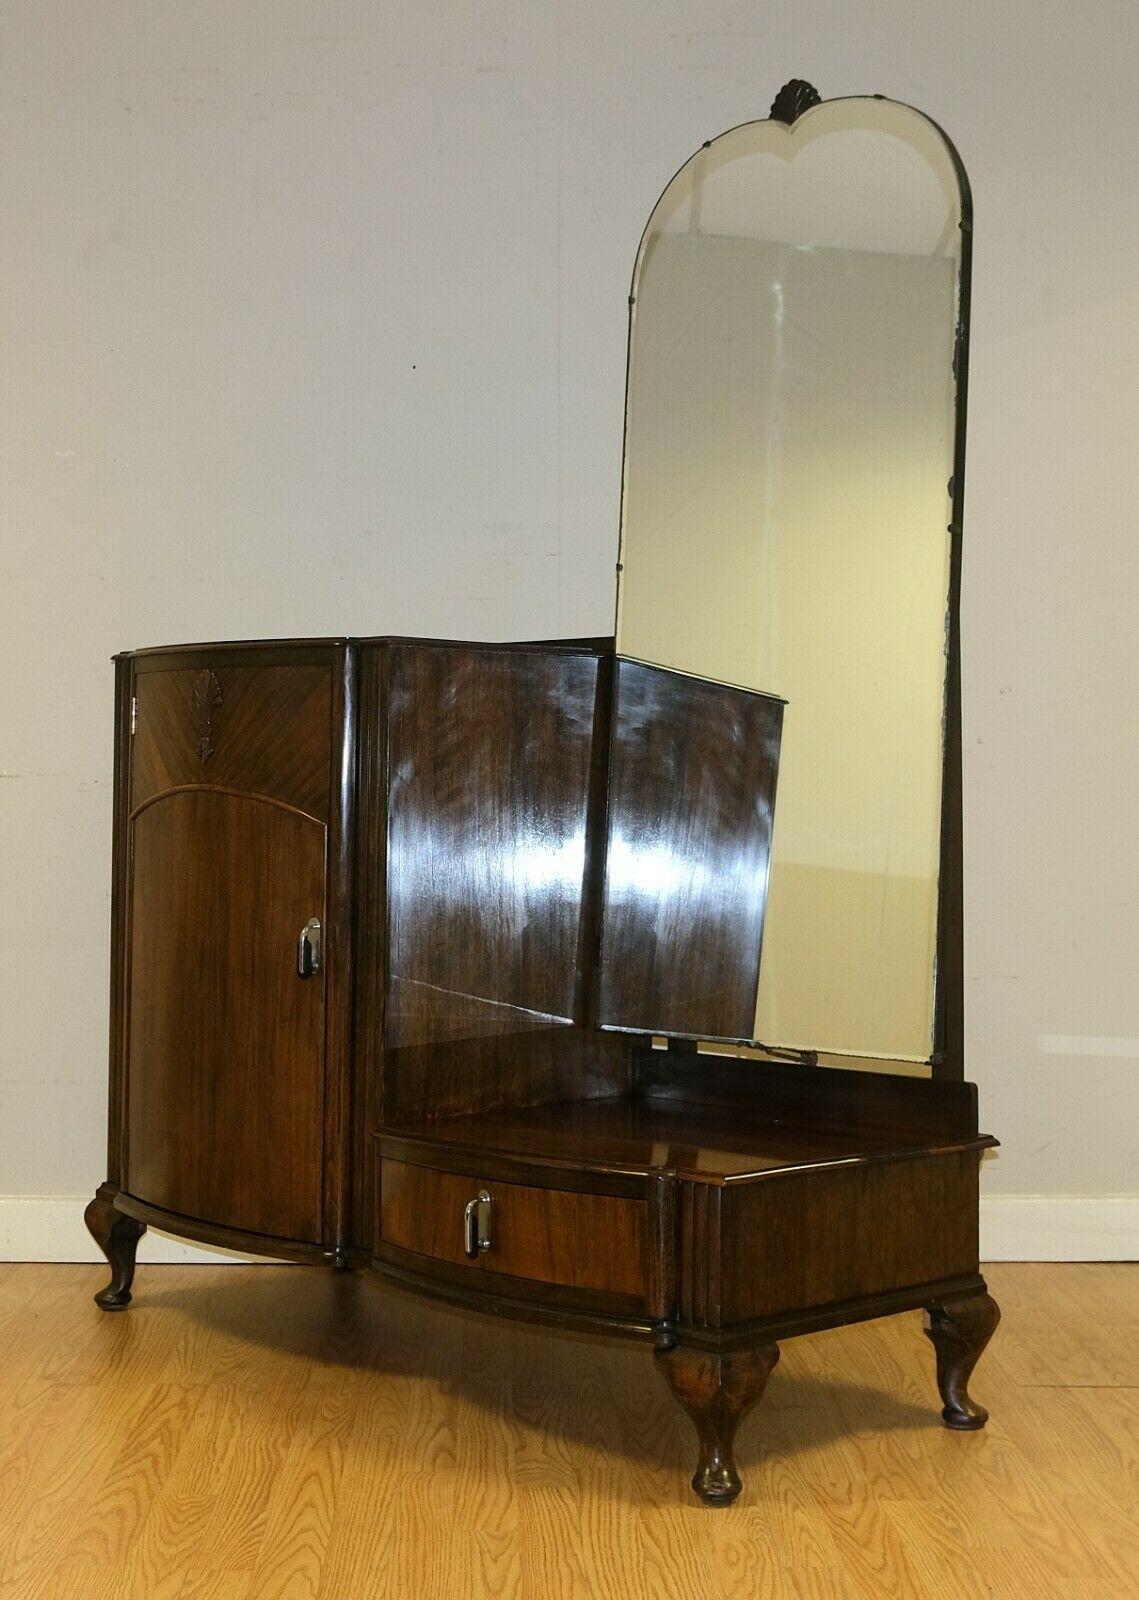 We are delighted to offer for sale this gorgeous C.W.S Cabinet Works Birmingham walnut dressing table on cabriole legs.

This piece is a part of a suite, with a ladies wardrobe, a bed and double wardrobe. This dressing table is well presented with